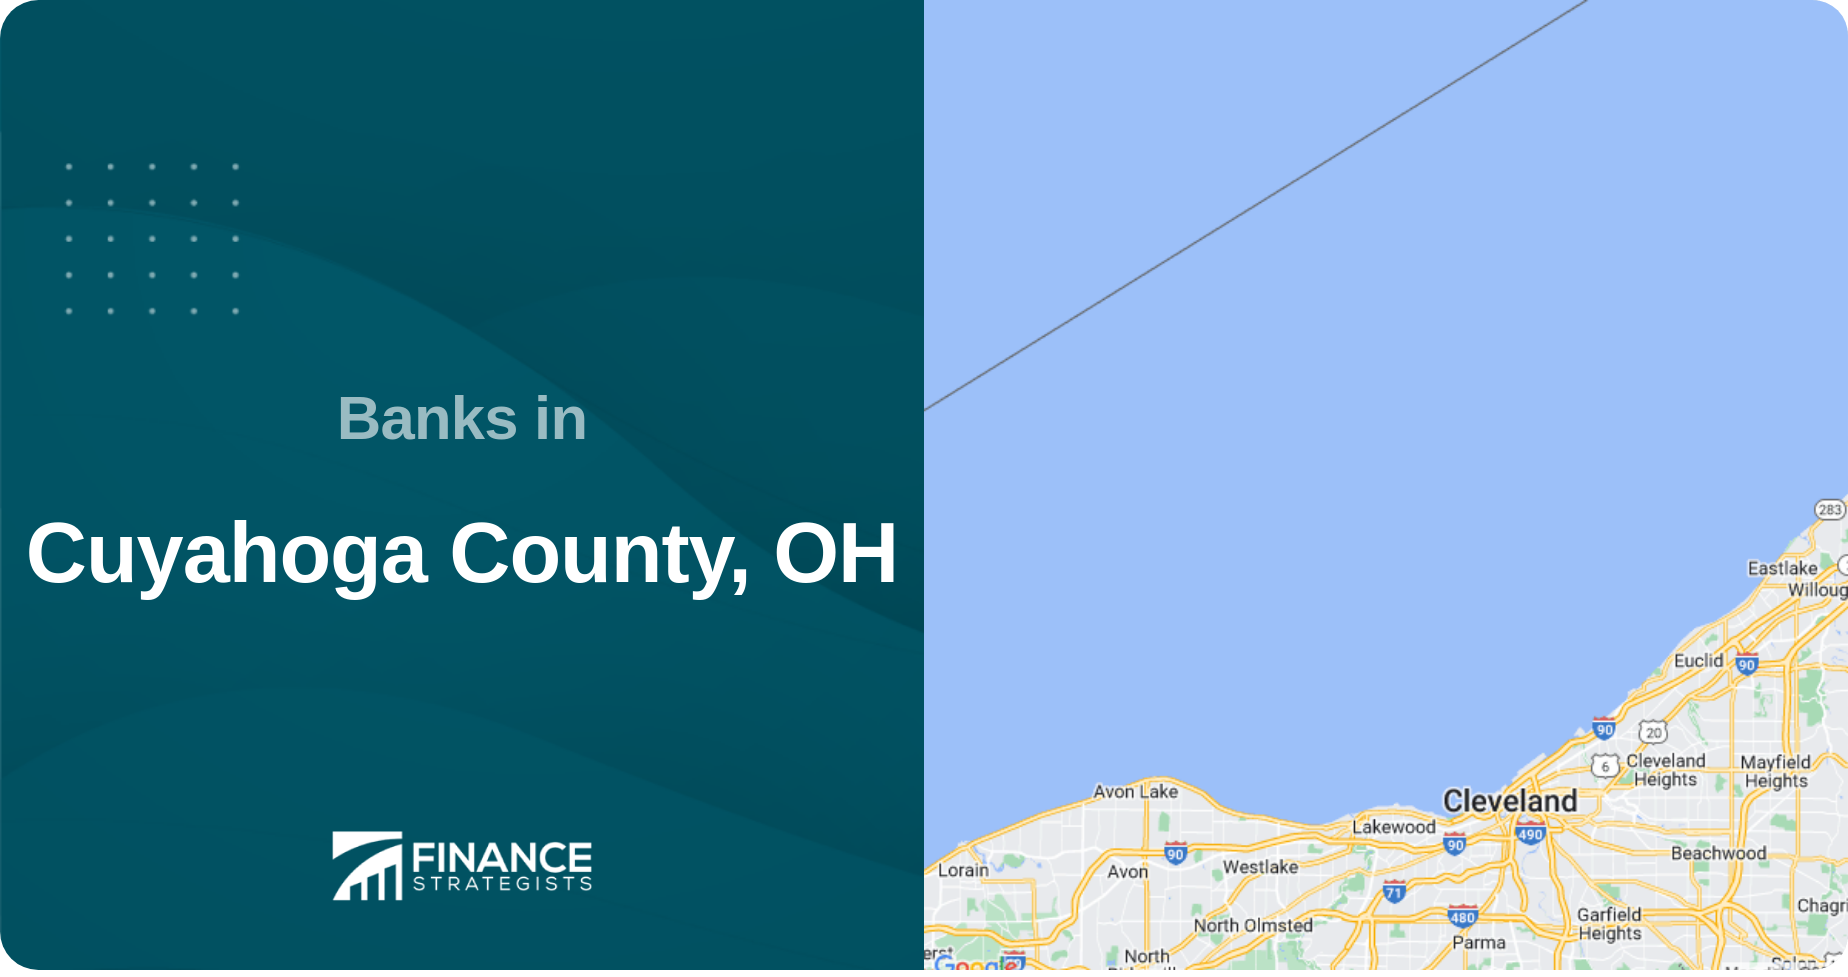 Banks in Cuyahoga County, OH